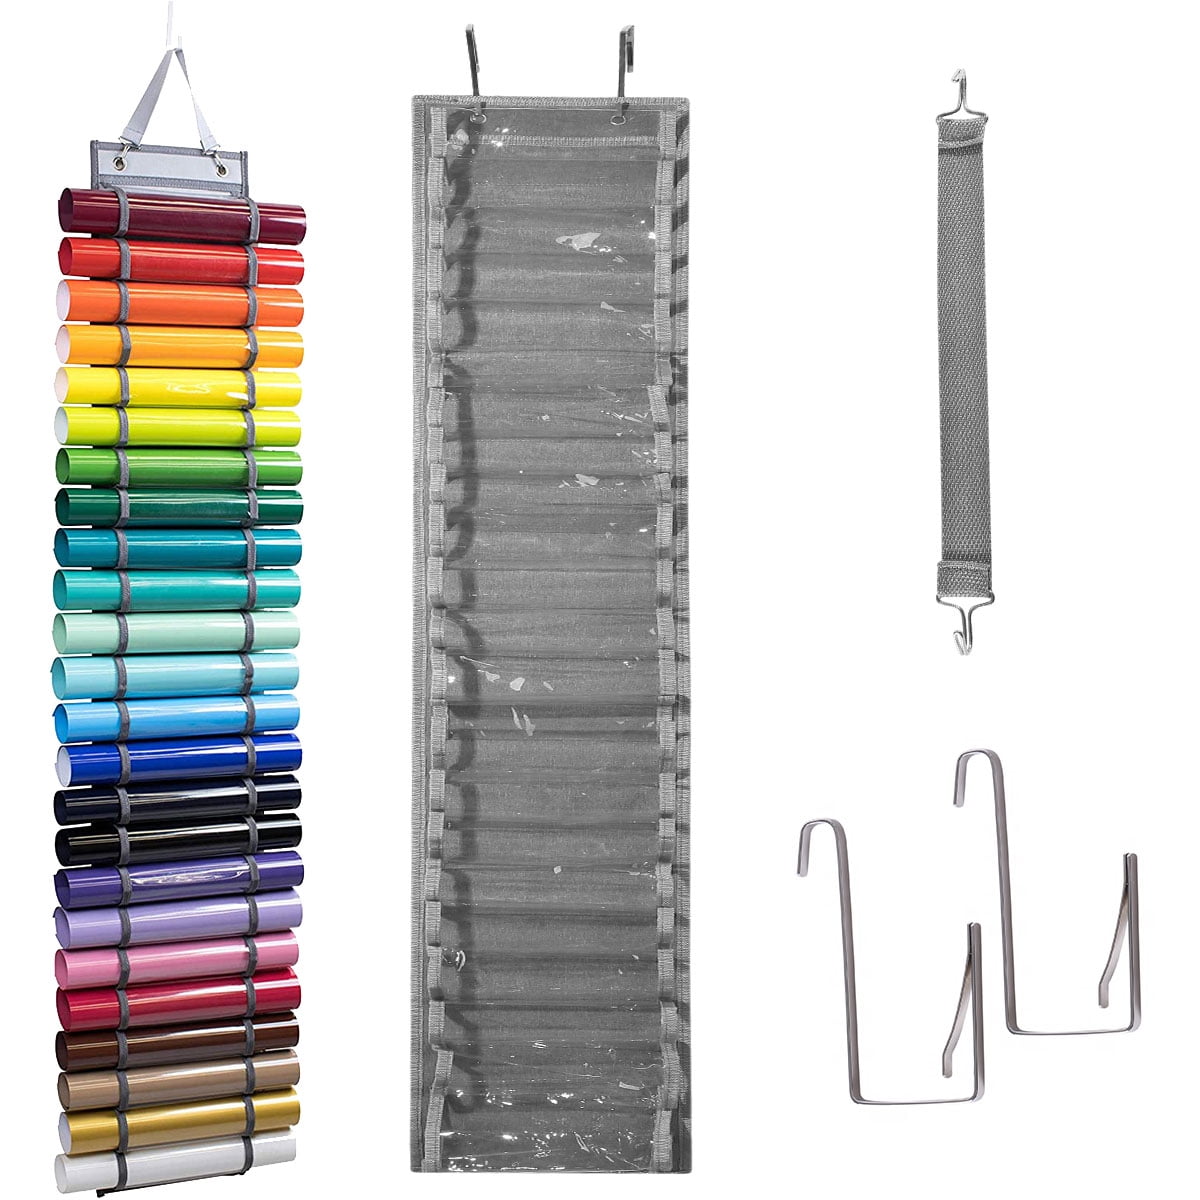 Vinyl Hanging Bag with Door Hooks and Strap for Home Craft Room Vinyl Roll Holder with 48 Compartments Craft Vinyl Organizer Storage Rack Wall Mount/Over The Door 